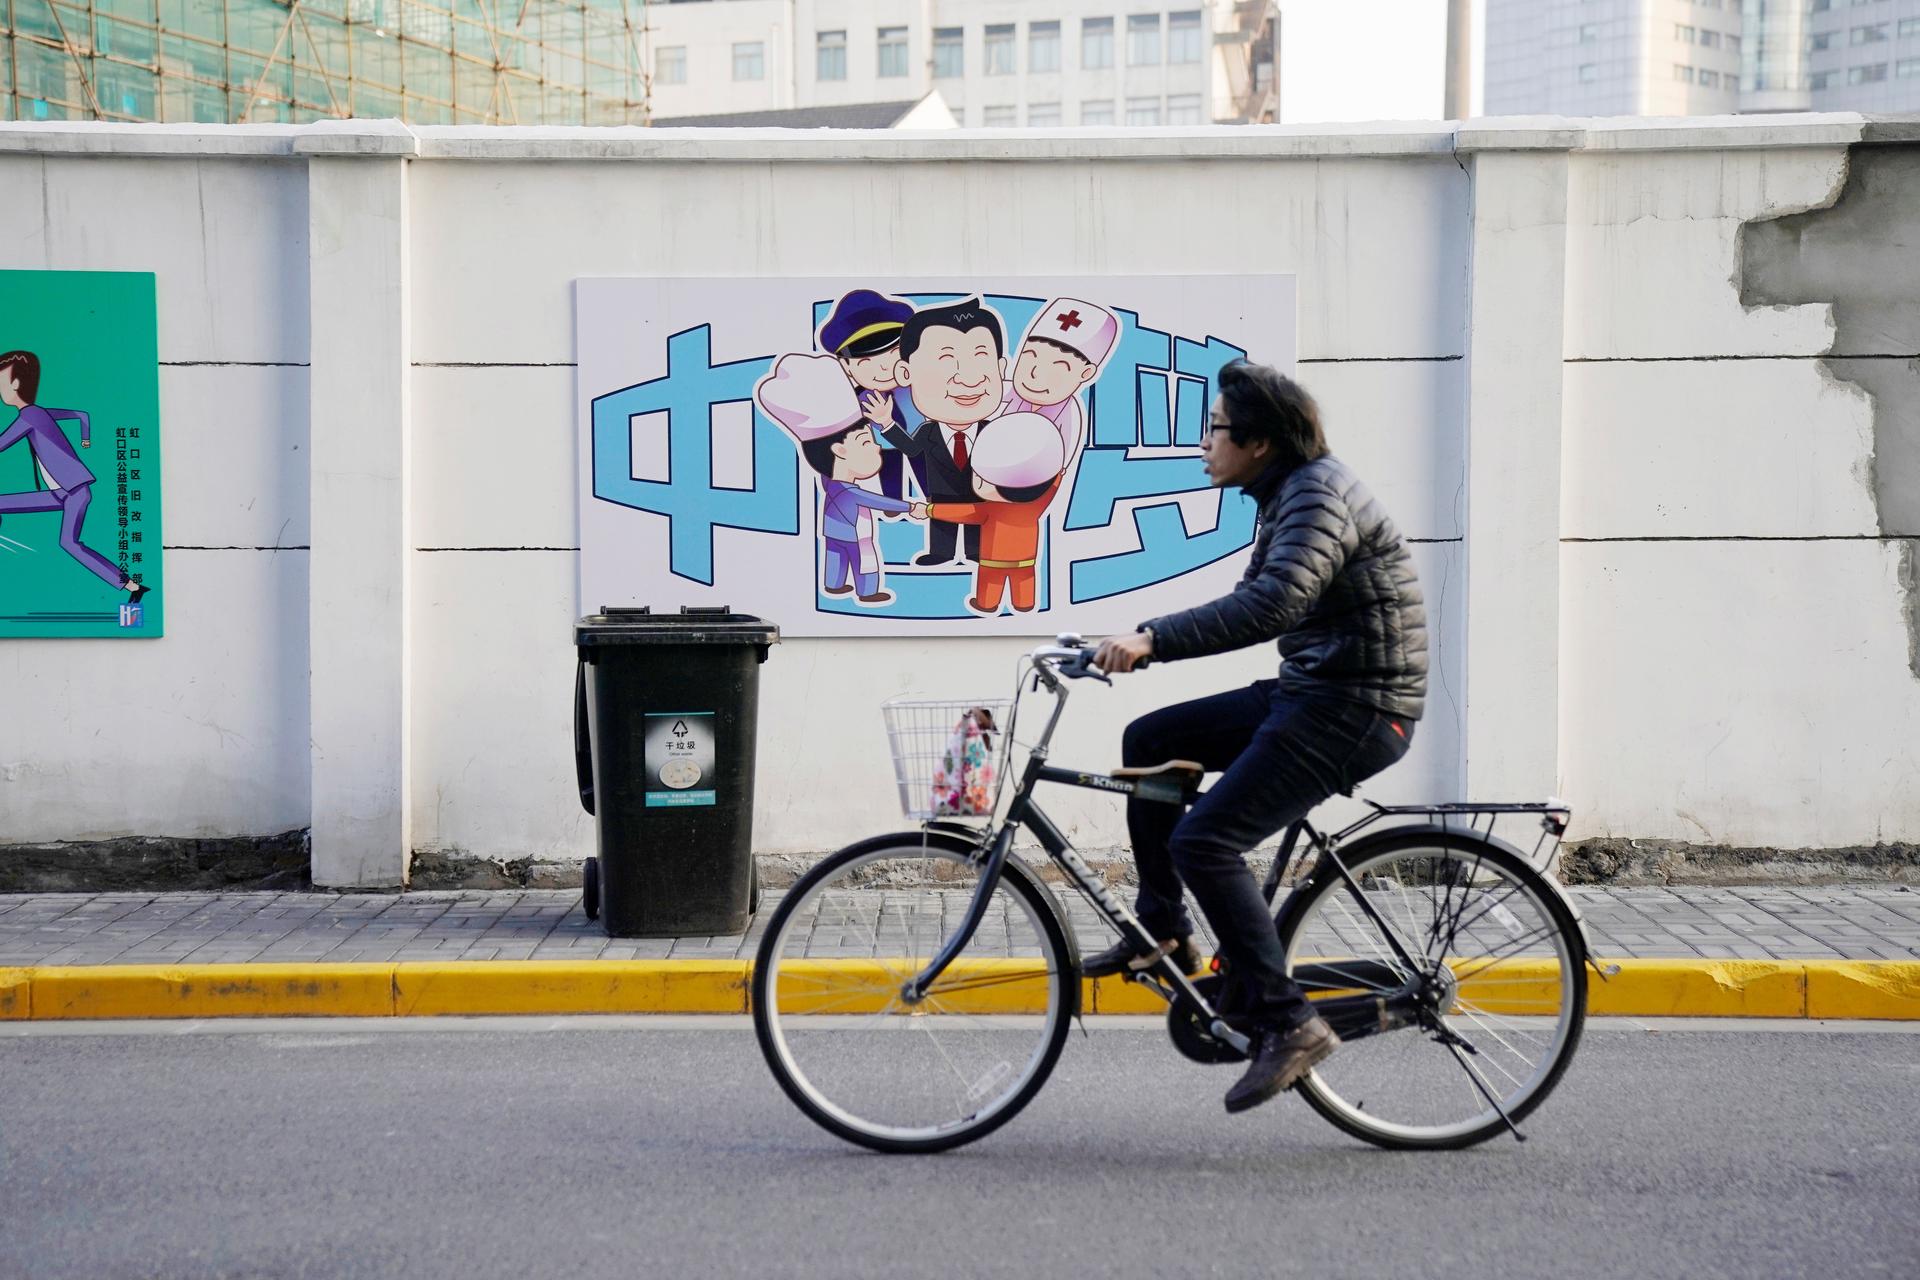 A cartoon depicting Chinese President Xi Jinping with the Chinese characters reading "Dream of China" is seen in the background as a bicyclist rides past.